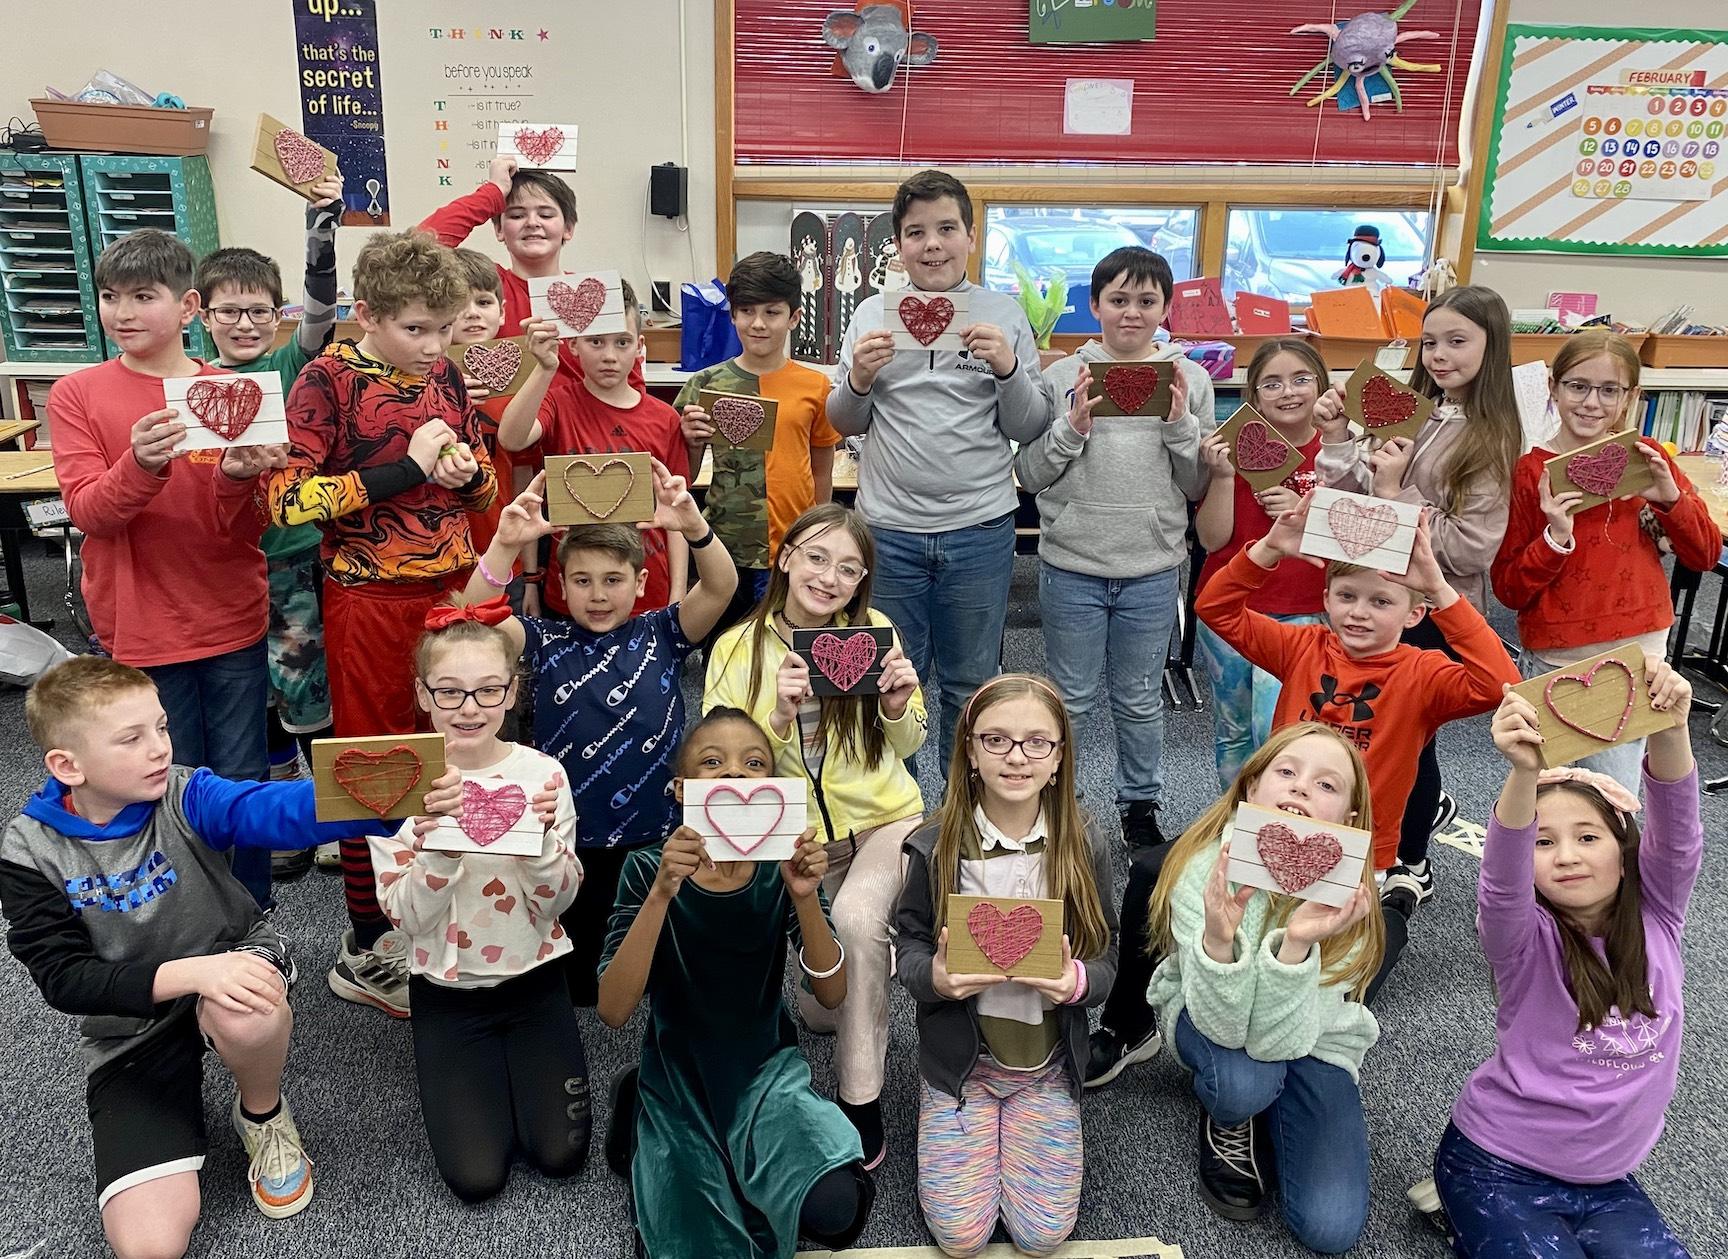 Mrs. Stagno’s 4th-graders at McCullough show off their string-art projects